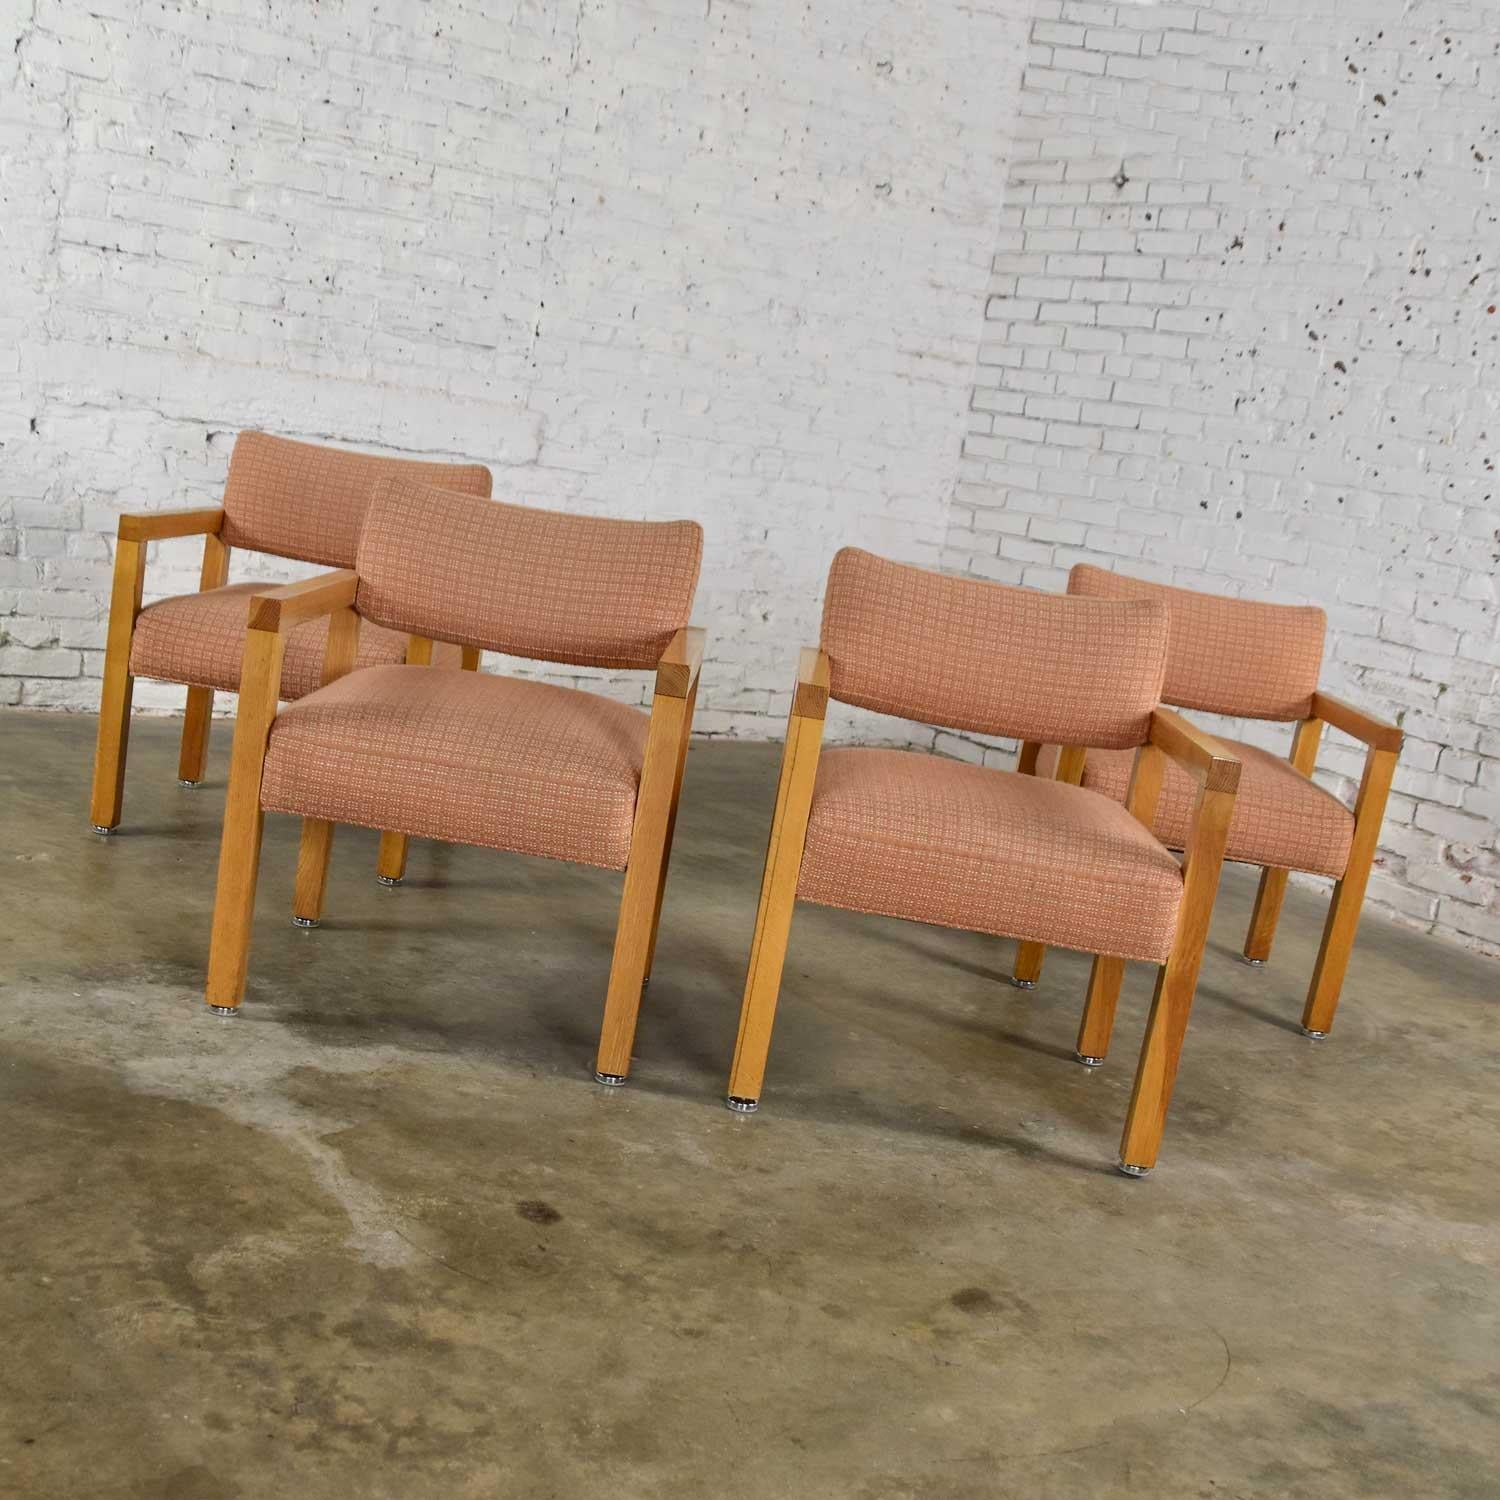 Modern Square Frame Oak Armchairs with Original Blush Textured Fabric, Set of 4 For Sale 3